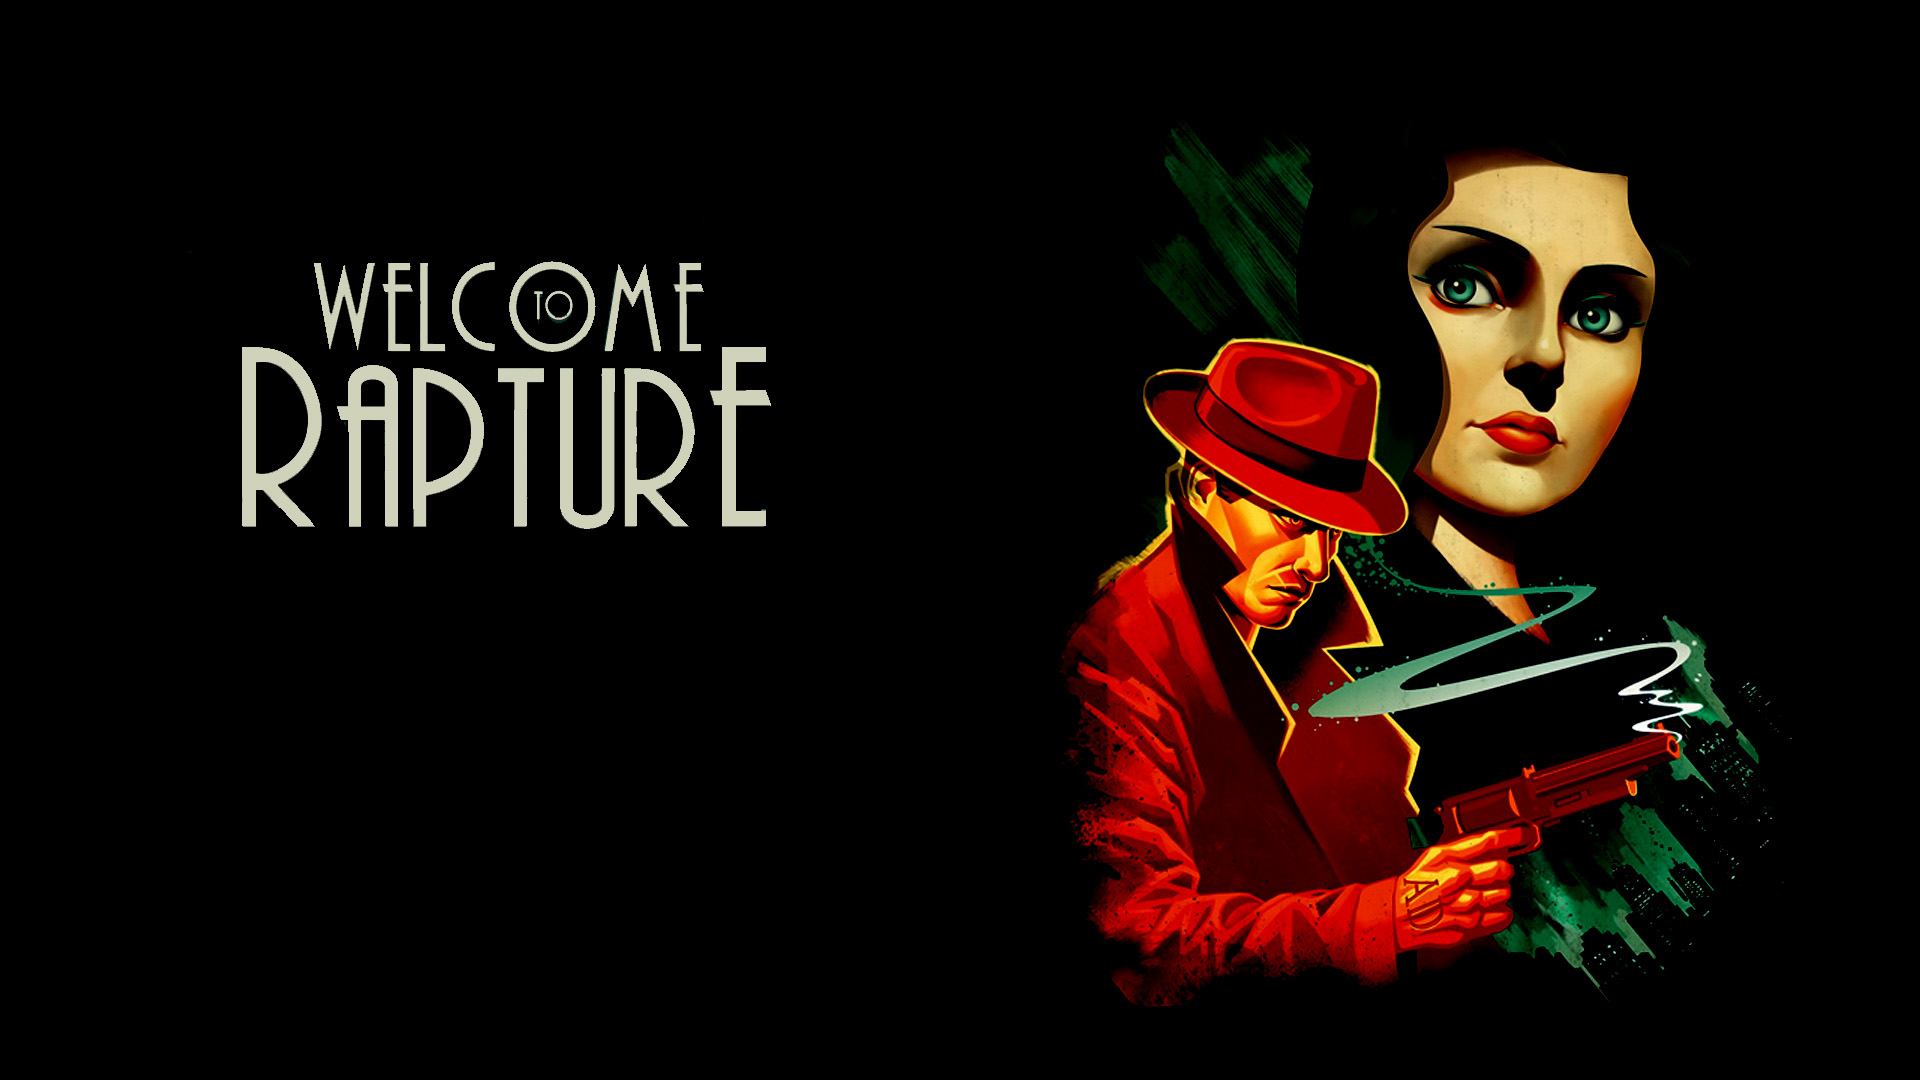 Games wallpaper gaming welcome to rapture